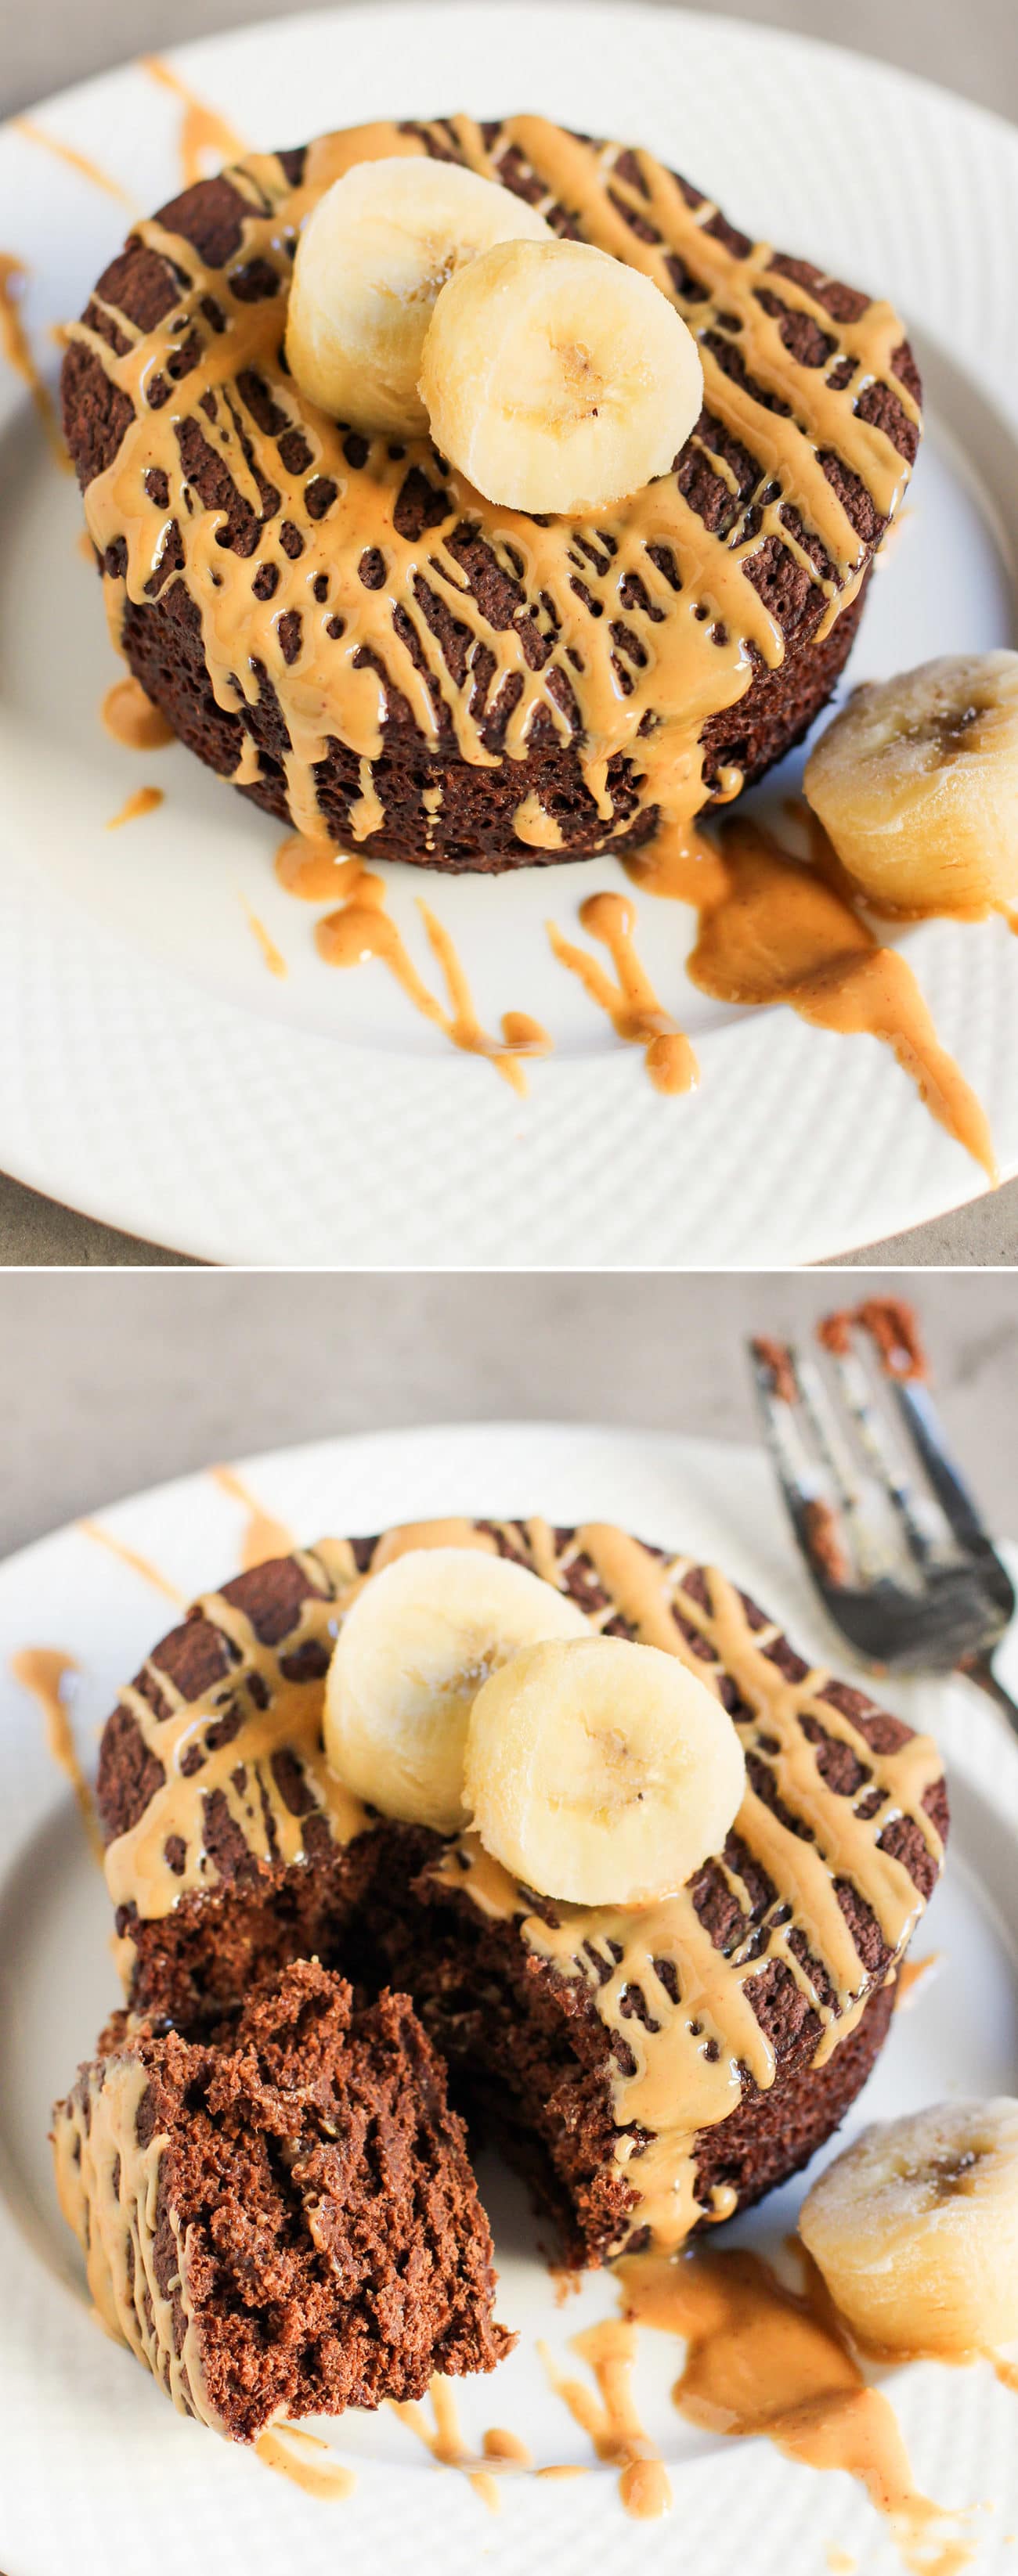 5-Minute Healthy Single-Serving Chocolate Peanut Butter Banana Microwave Cake (refined sugar free, high protein, high fiber, gluten free, vegan) -- Healthy Dessert Recipes at the Desserts With Benefits Blog